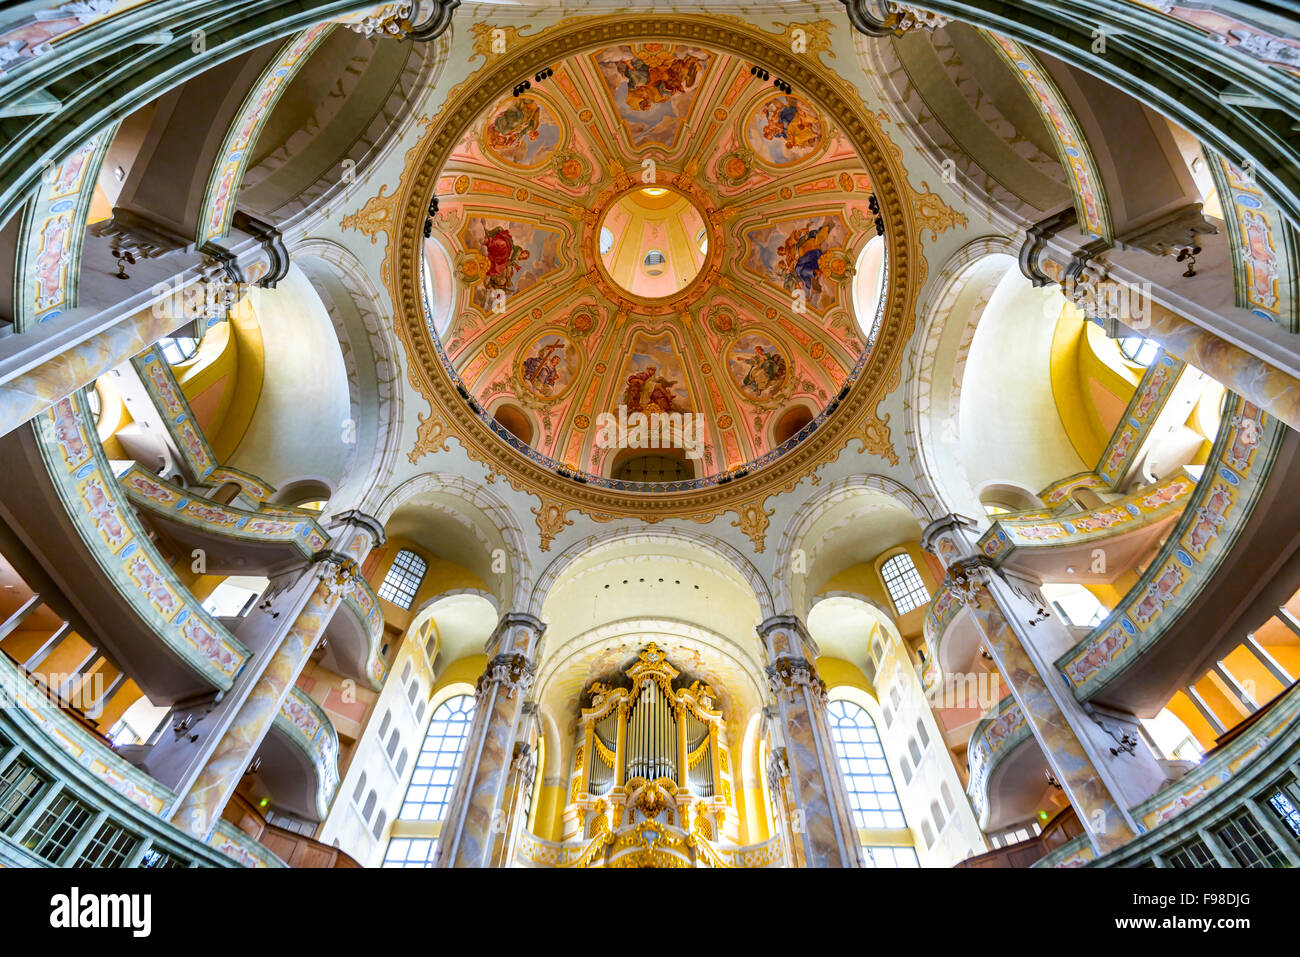 Dresden, Germany. The interior of the Frauenkirche cathedral in Dresda, Saxony. Frauenkirche was completed in 1743. Stock Photo